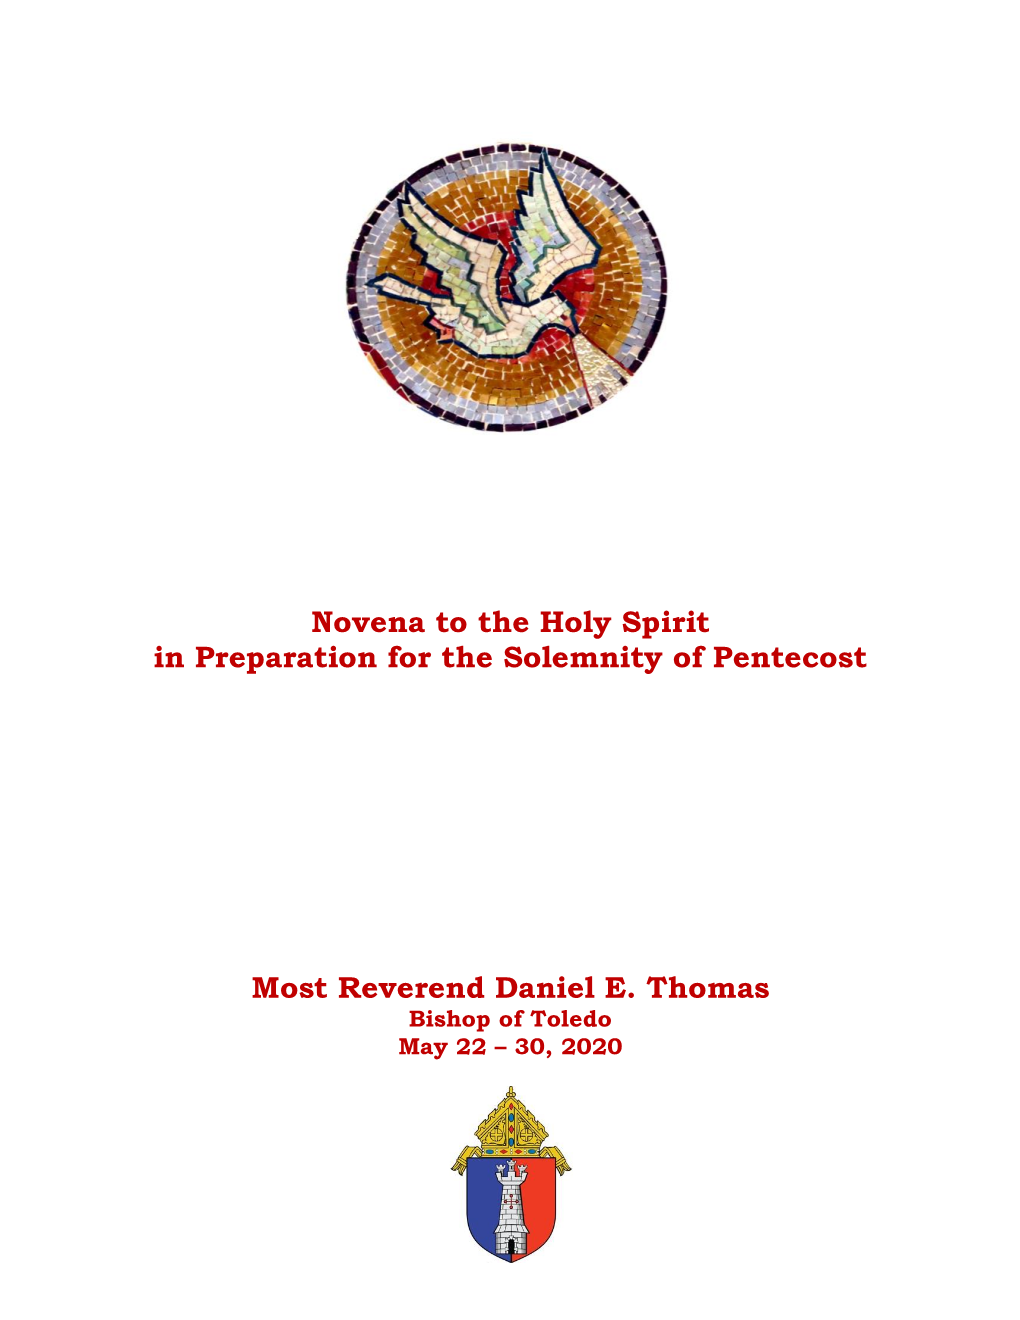 Novena to the Holy Spirit in Preparation for the Solemnity of Pentecost